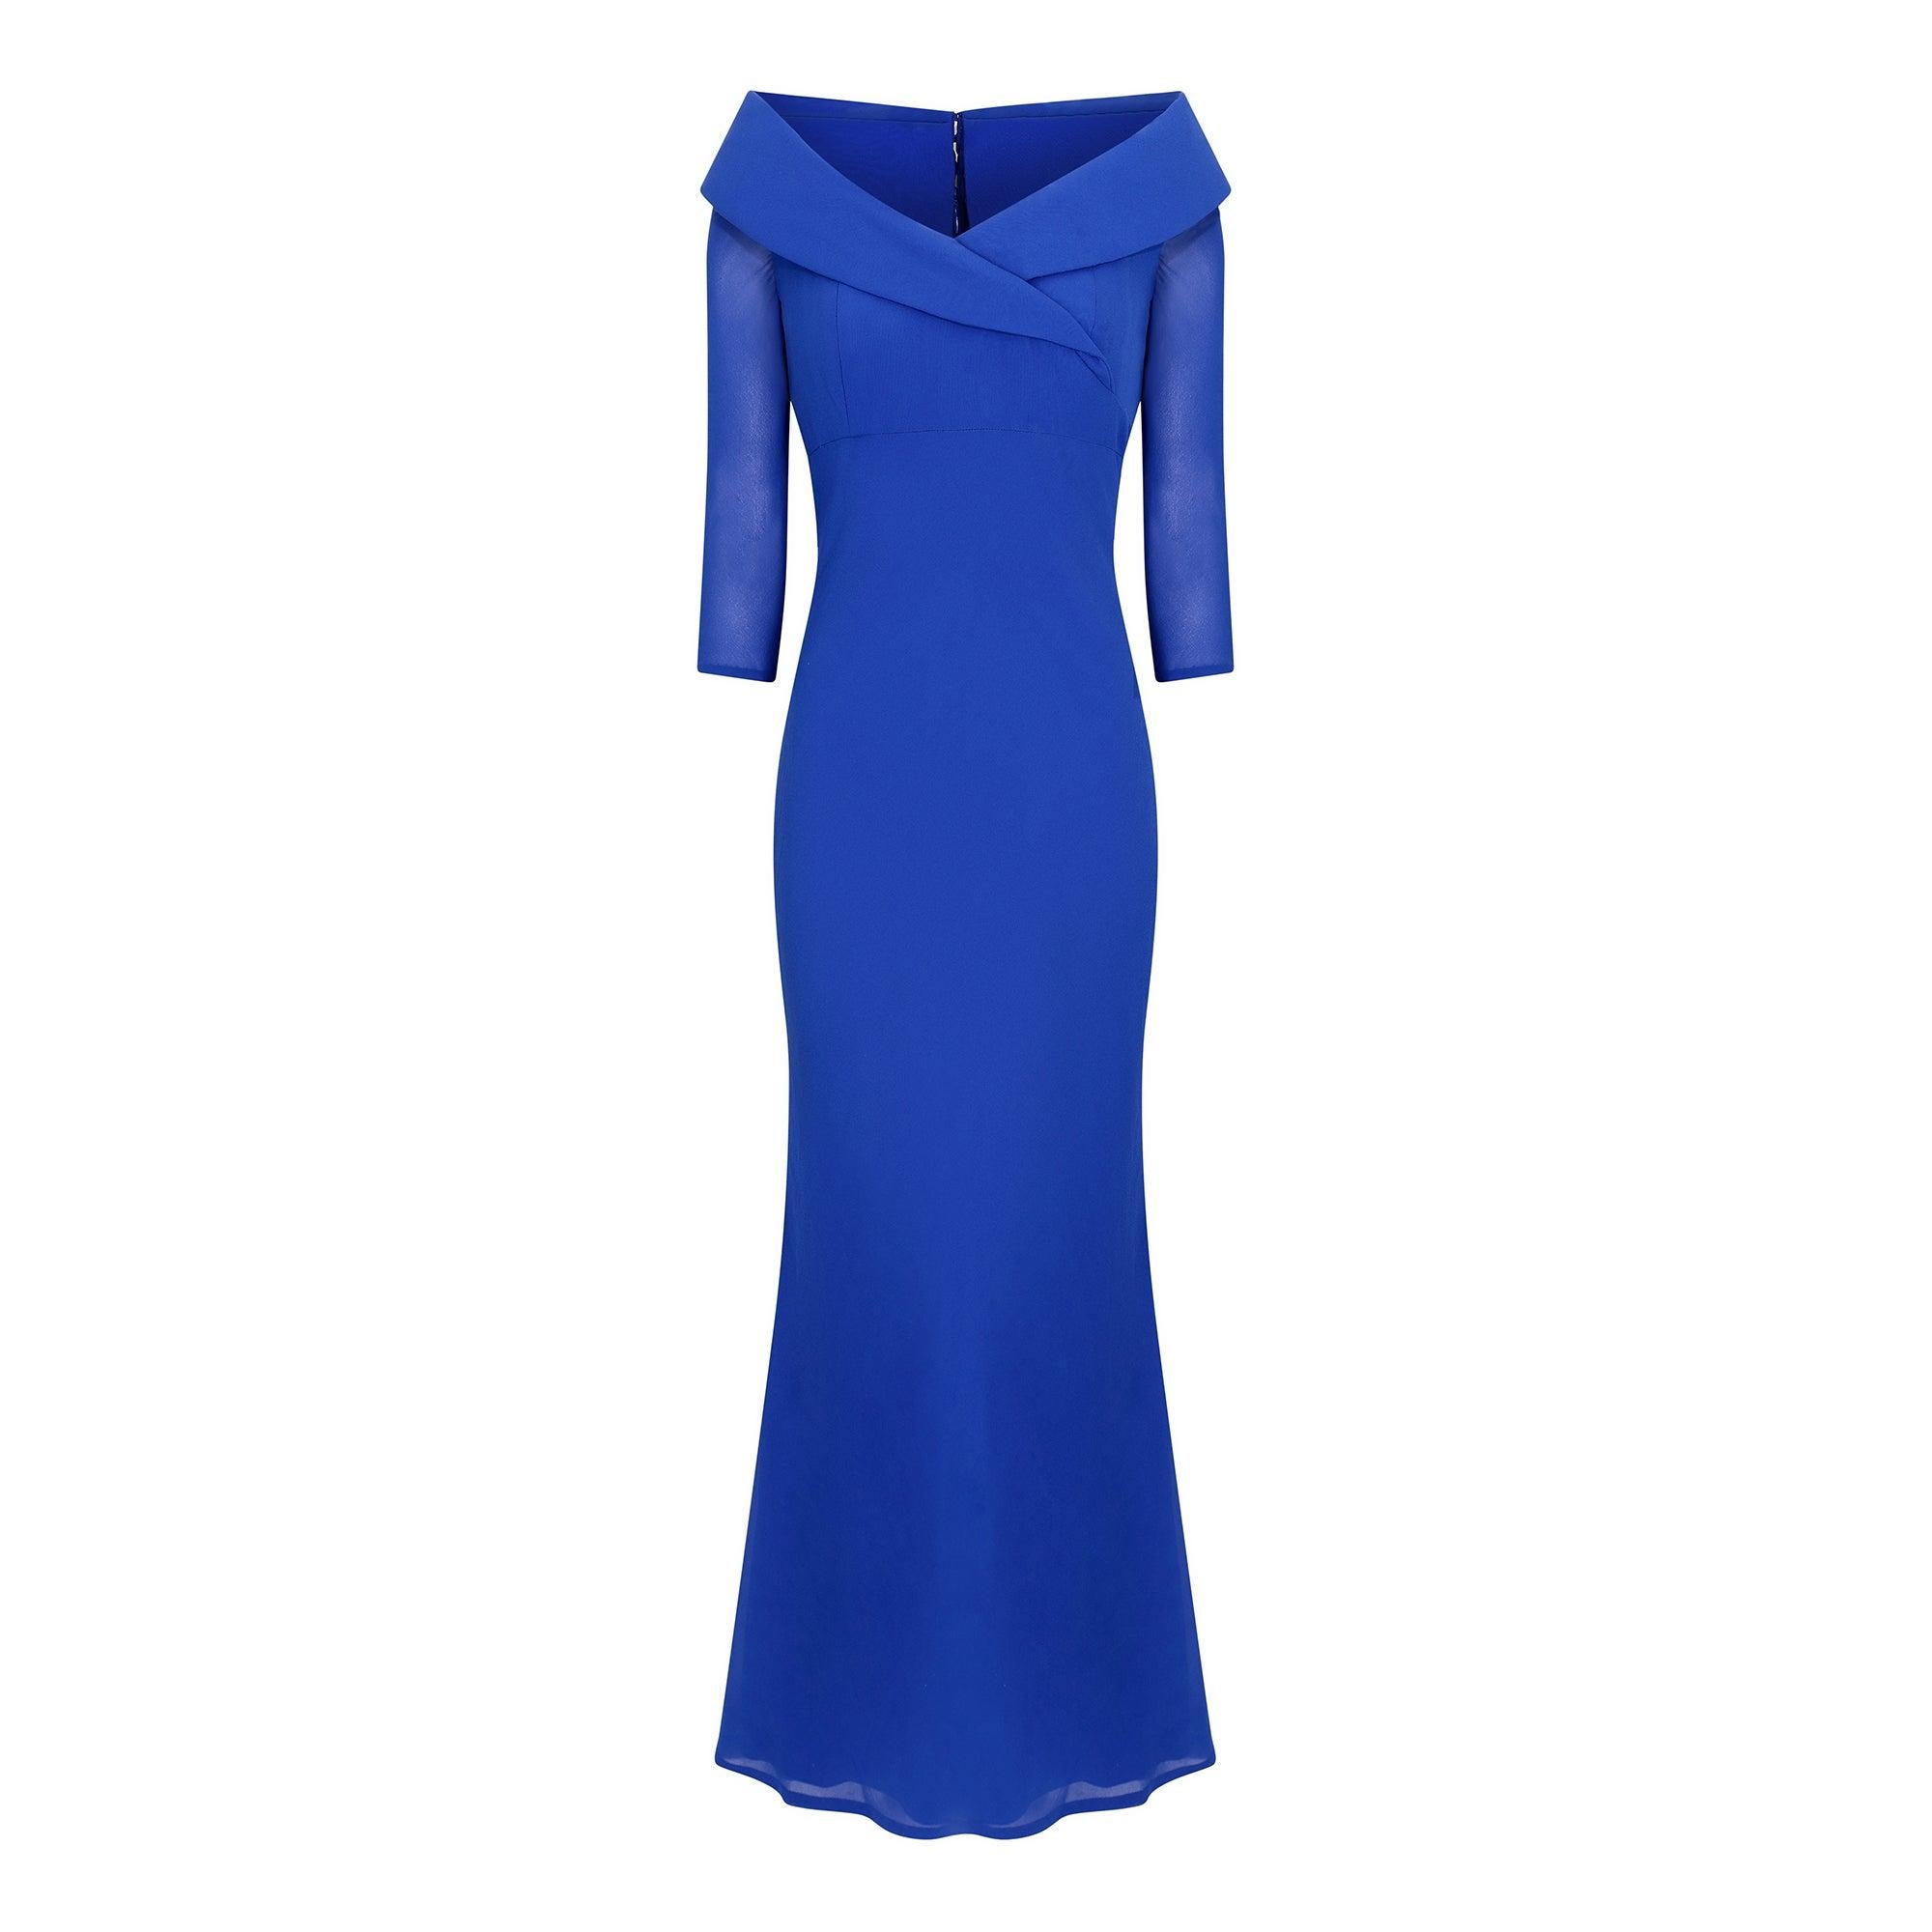 Bruce Oldfield Royal Blue Couture Dress